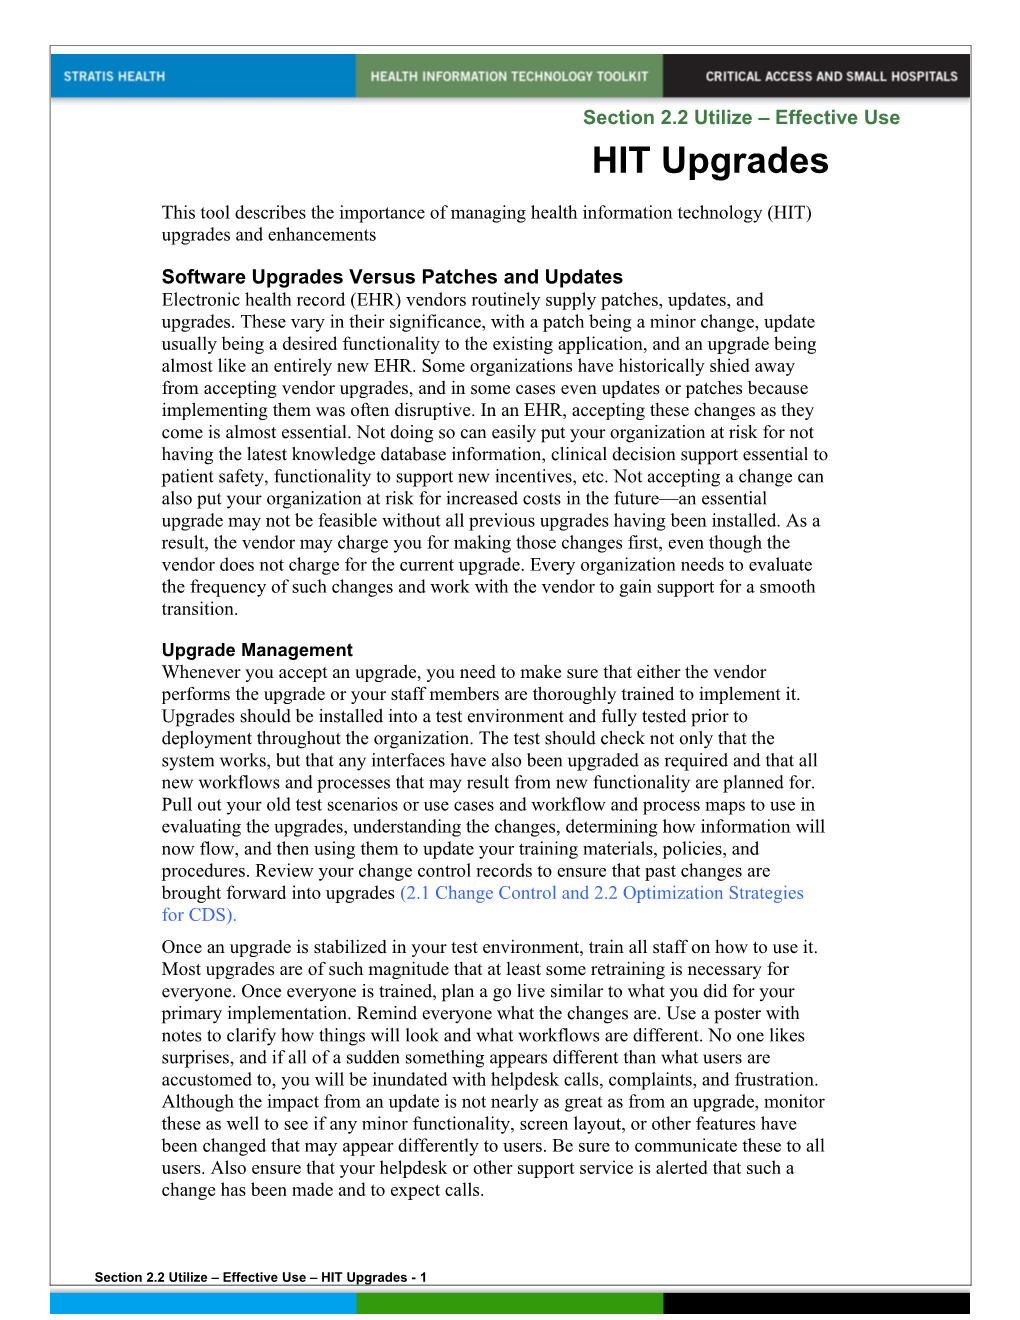 Software Upgrades Versus Patches and Updates